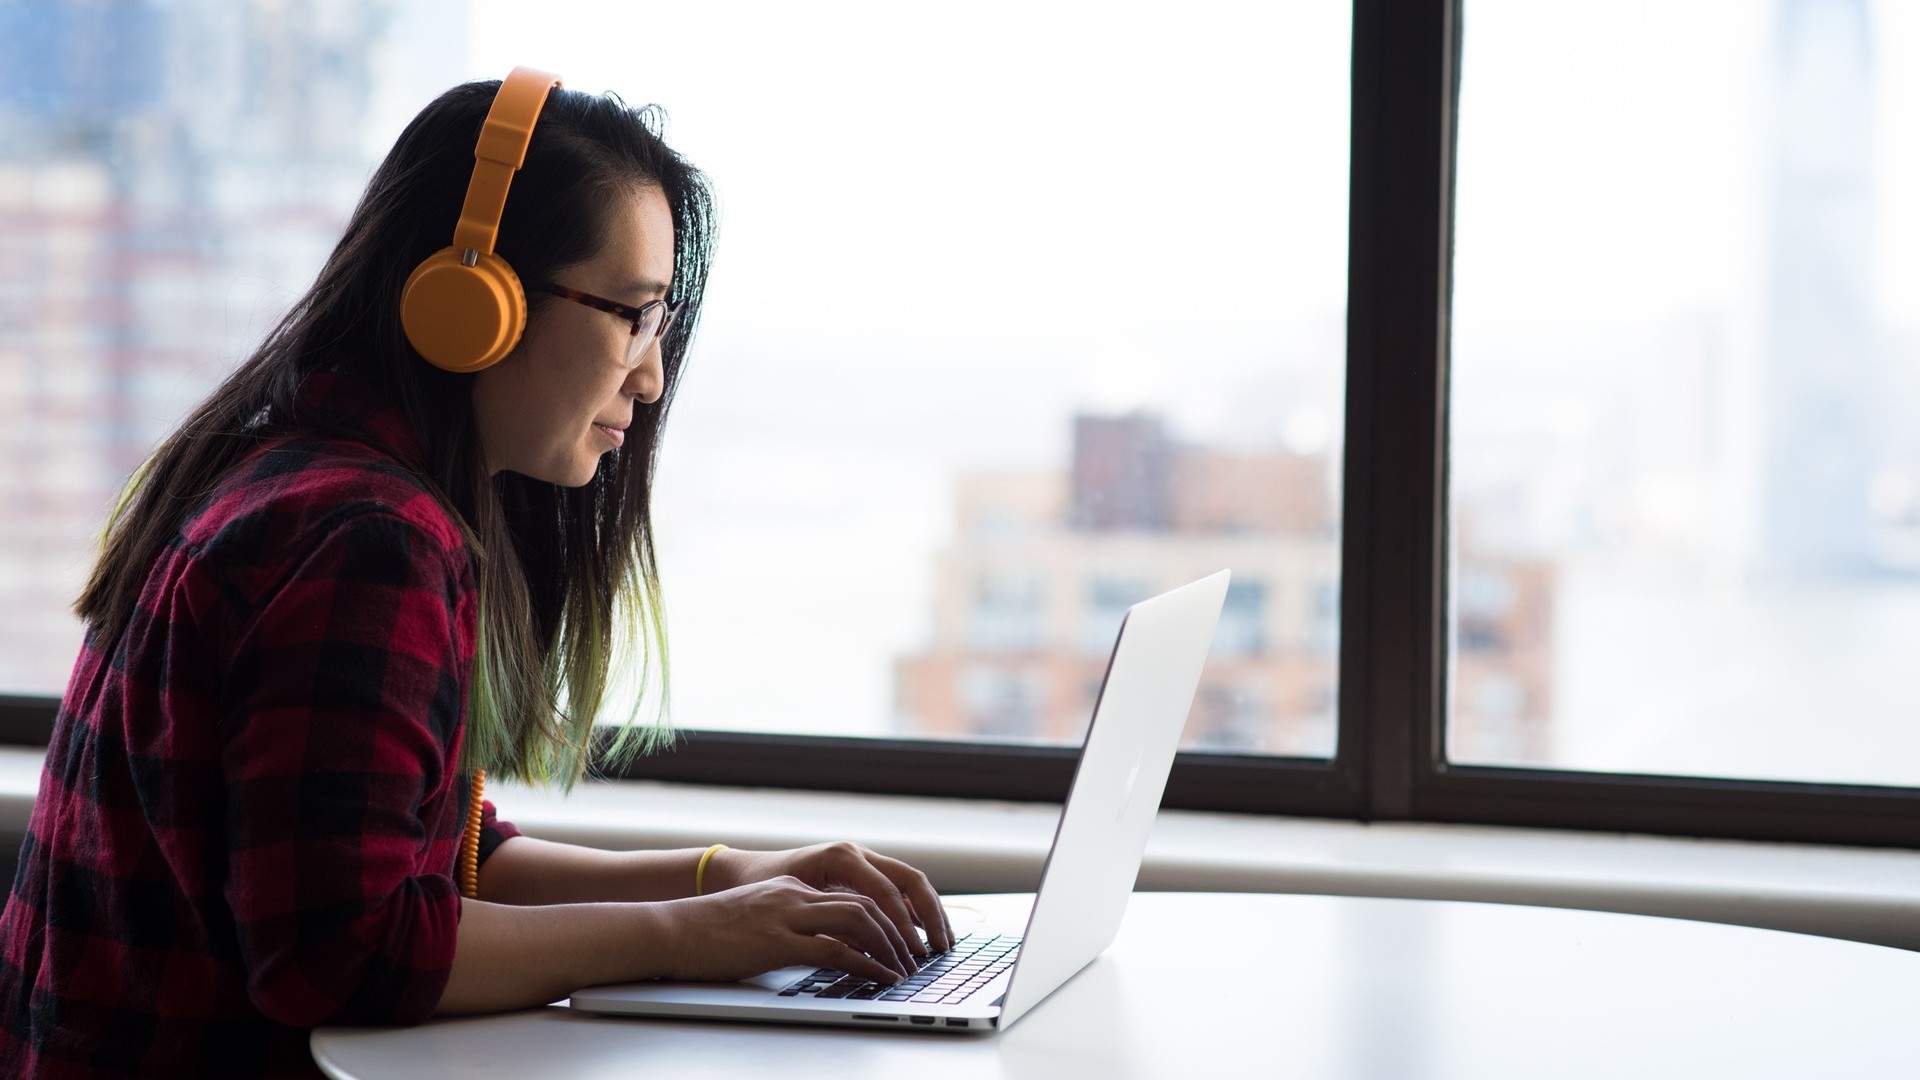 Woman with orange headphones using a laptop in a high-rise office